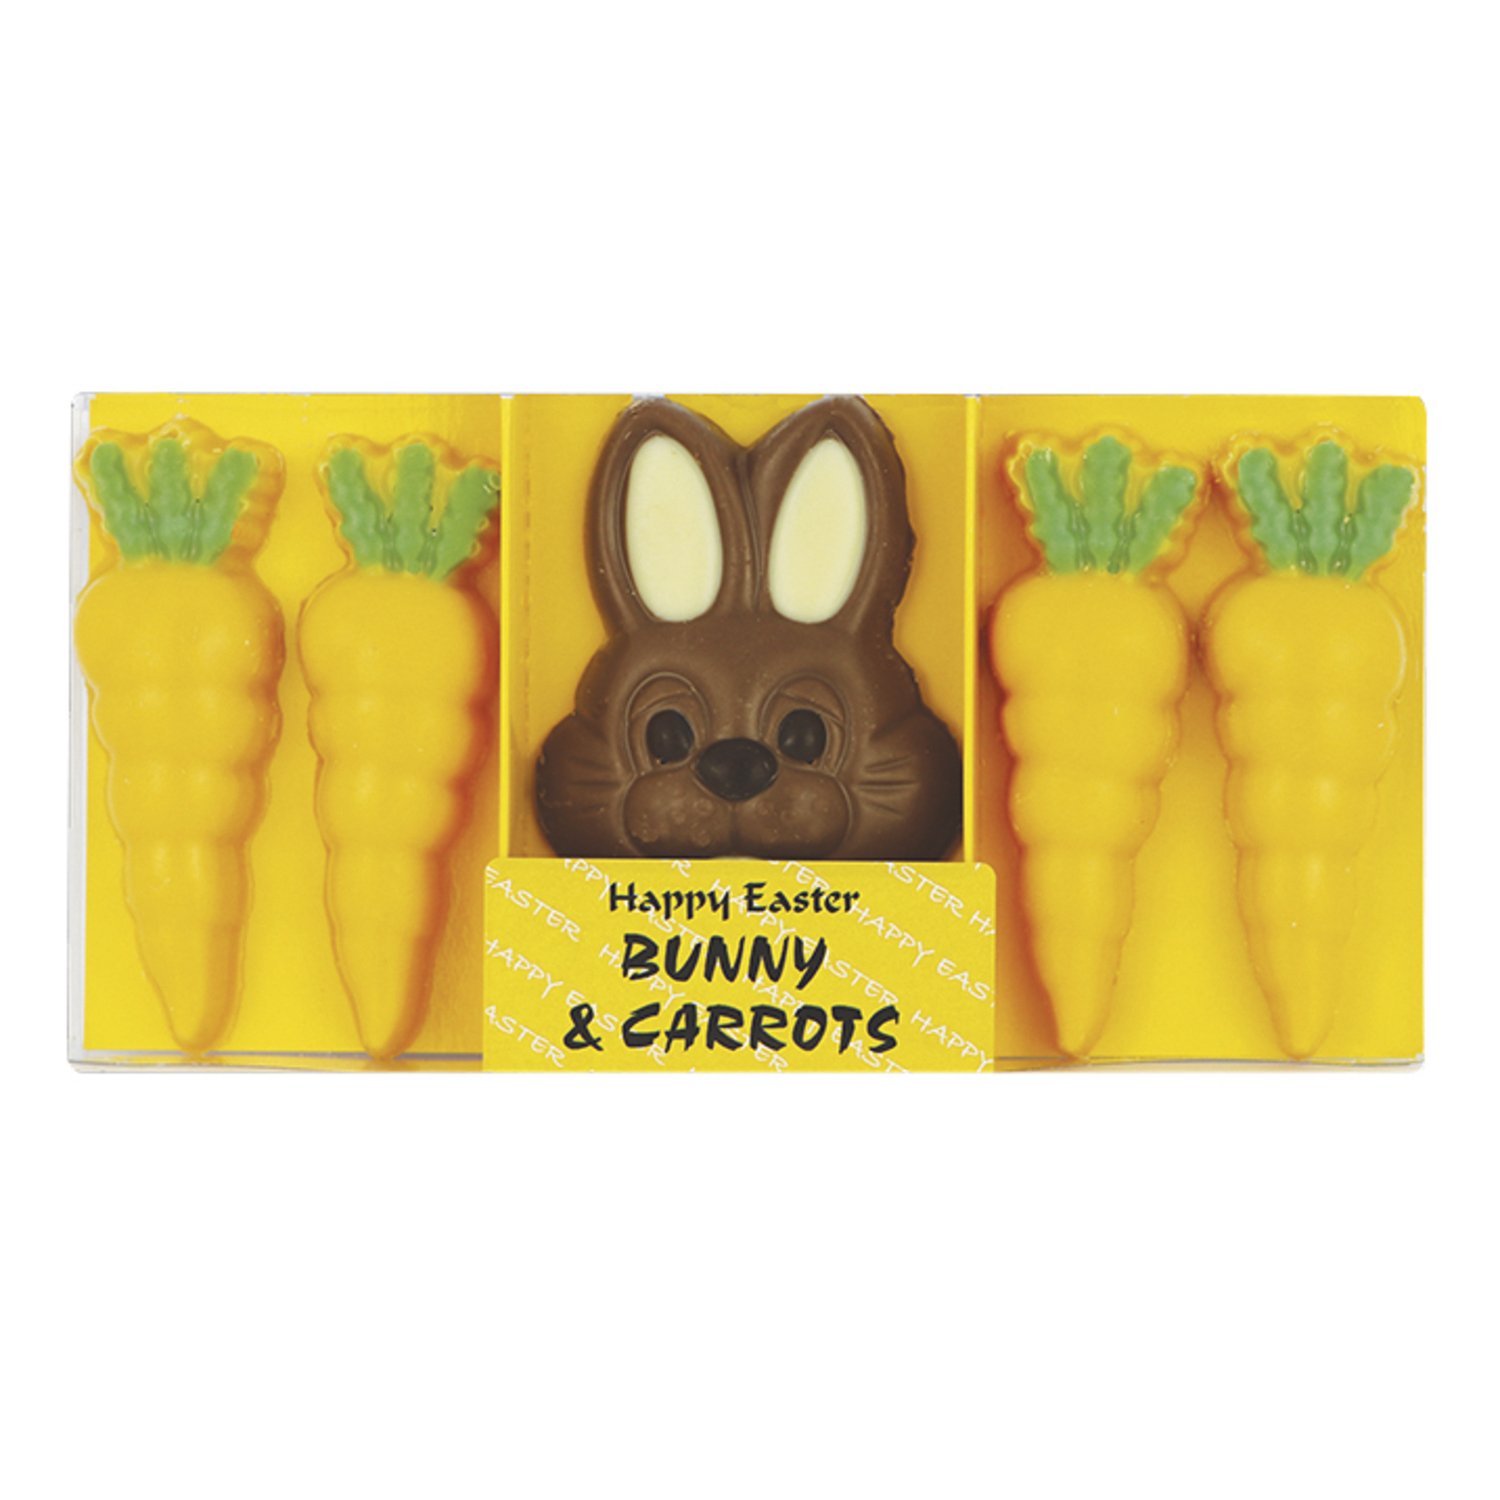 Happy Easter bunny and carrots in gift pack - 12x95g